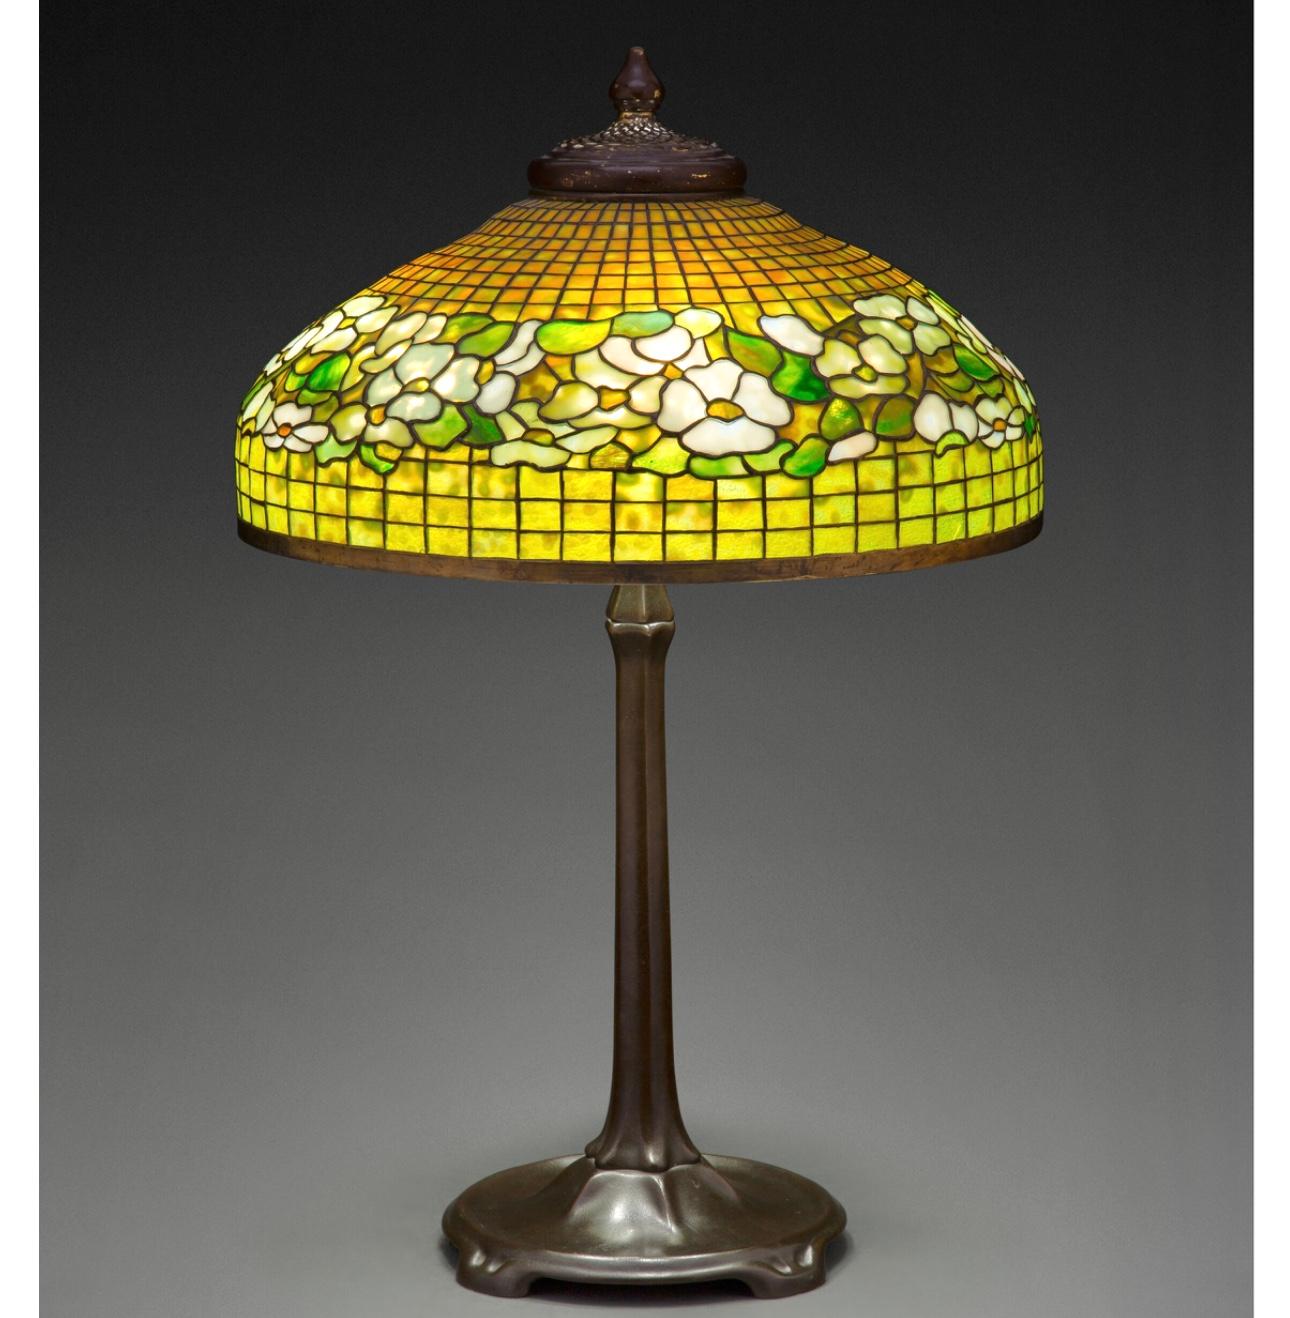 A large Tiffany Studios leaded glass and patinated bronze banded dogwood table lamp, circa 1910
The 20.5 Inch diameter shade dominates a room and gives ample light to be the center piece and the center of conversation. The Tiffany Studios patinated